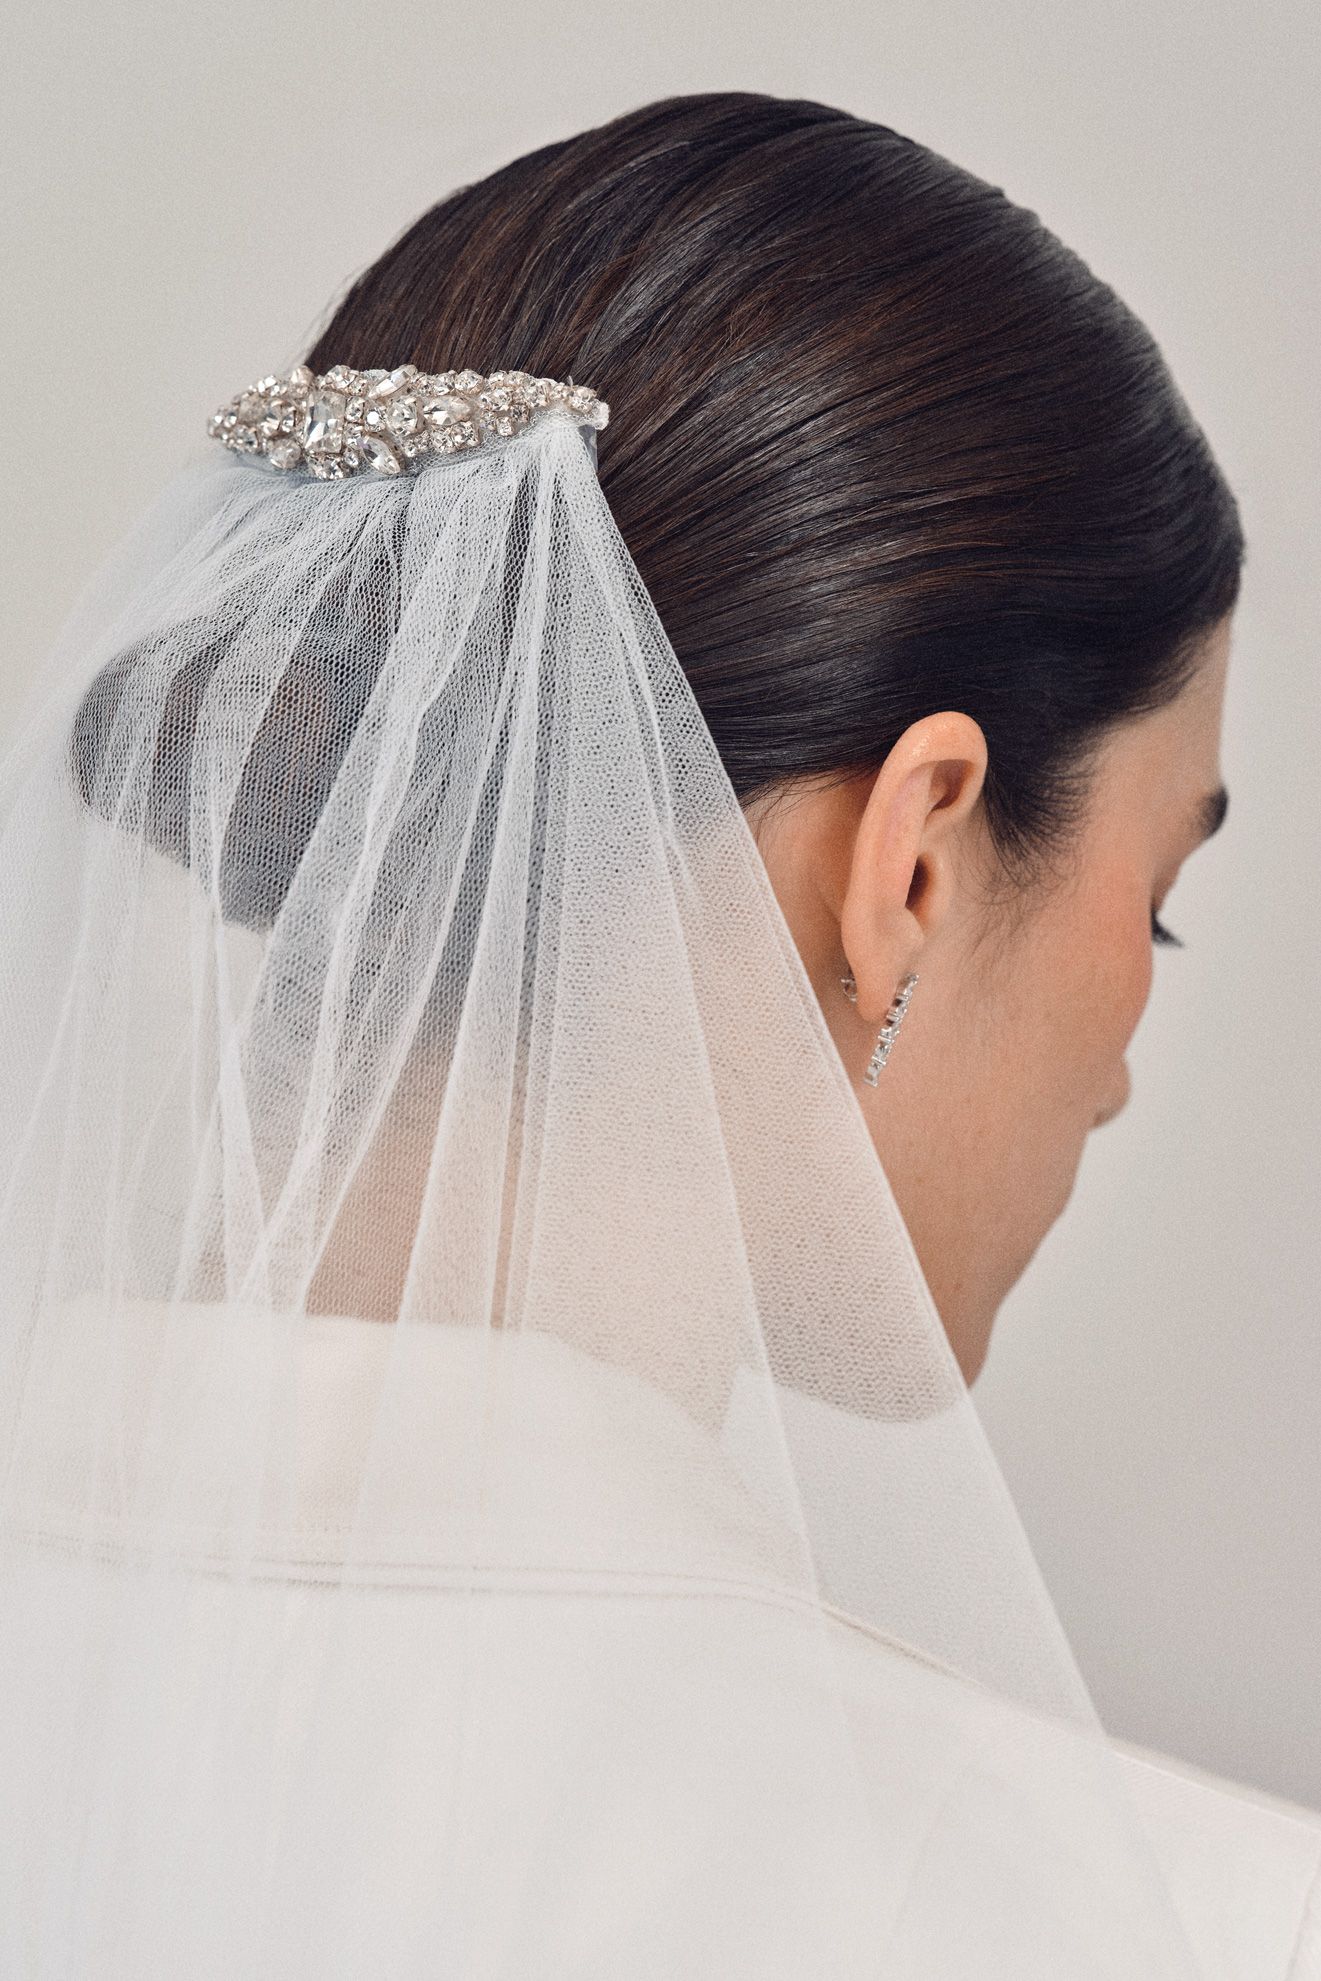 Close up image of a lady wearing hair accessories